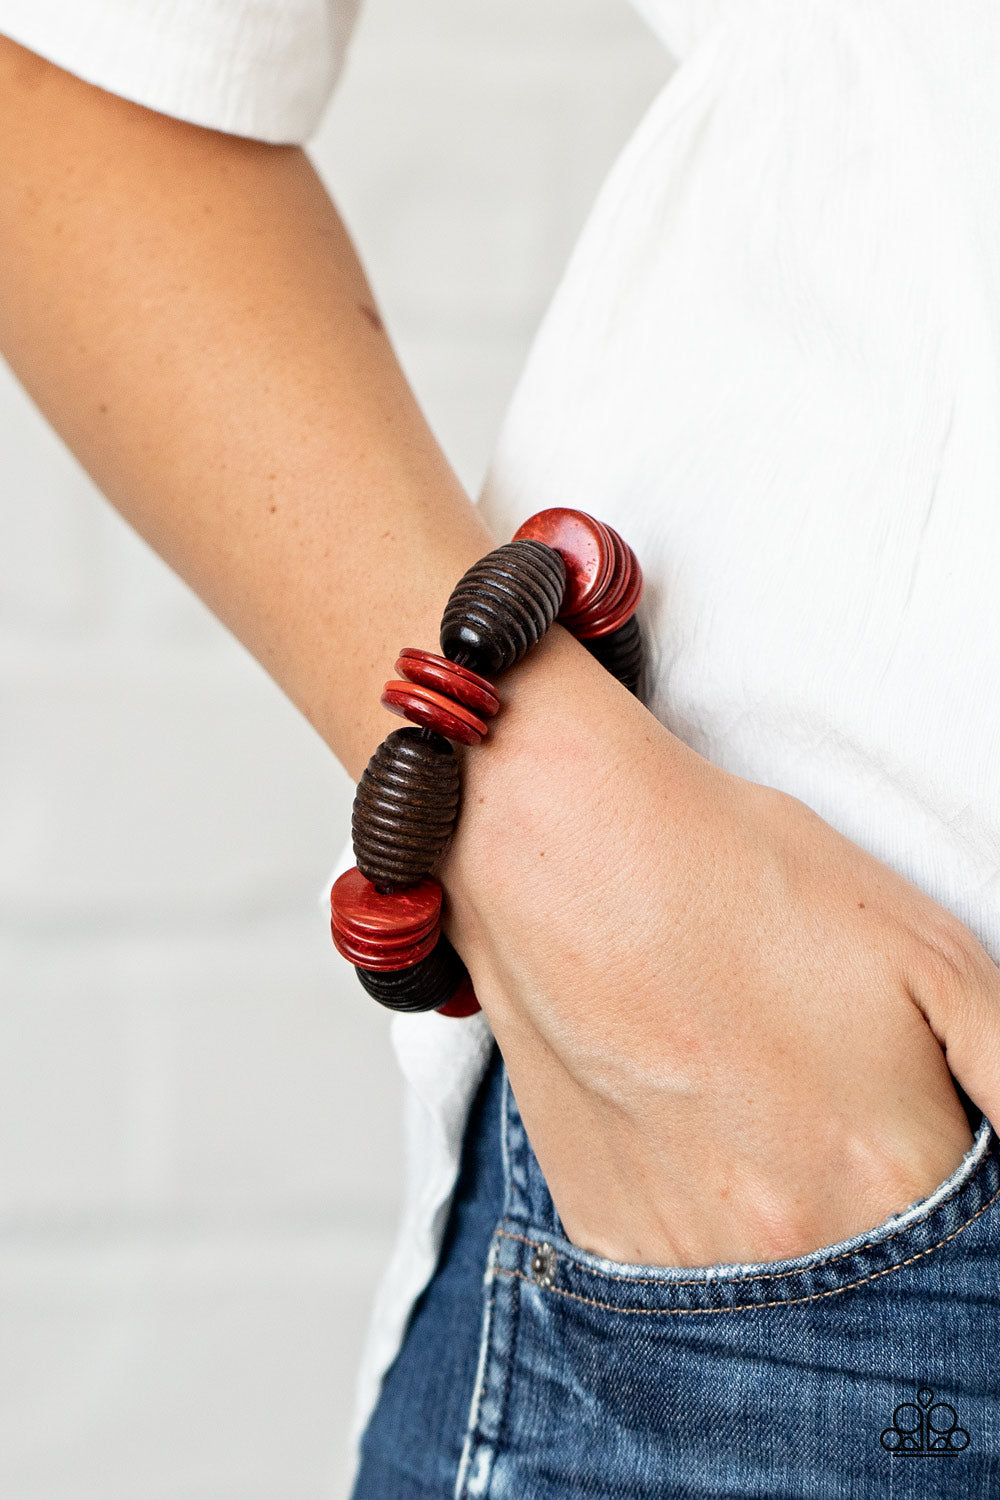 CARIBBEAN CASTAWAY - RED AND BROWN WOODEN STRETCH BRACELET